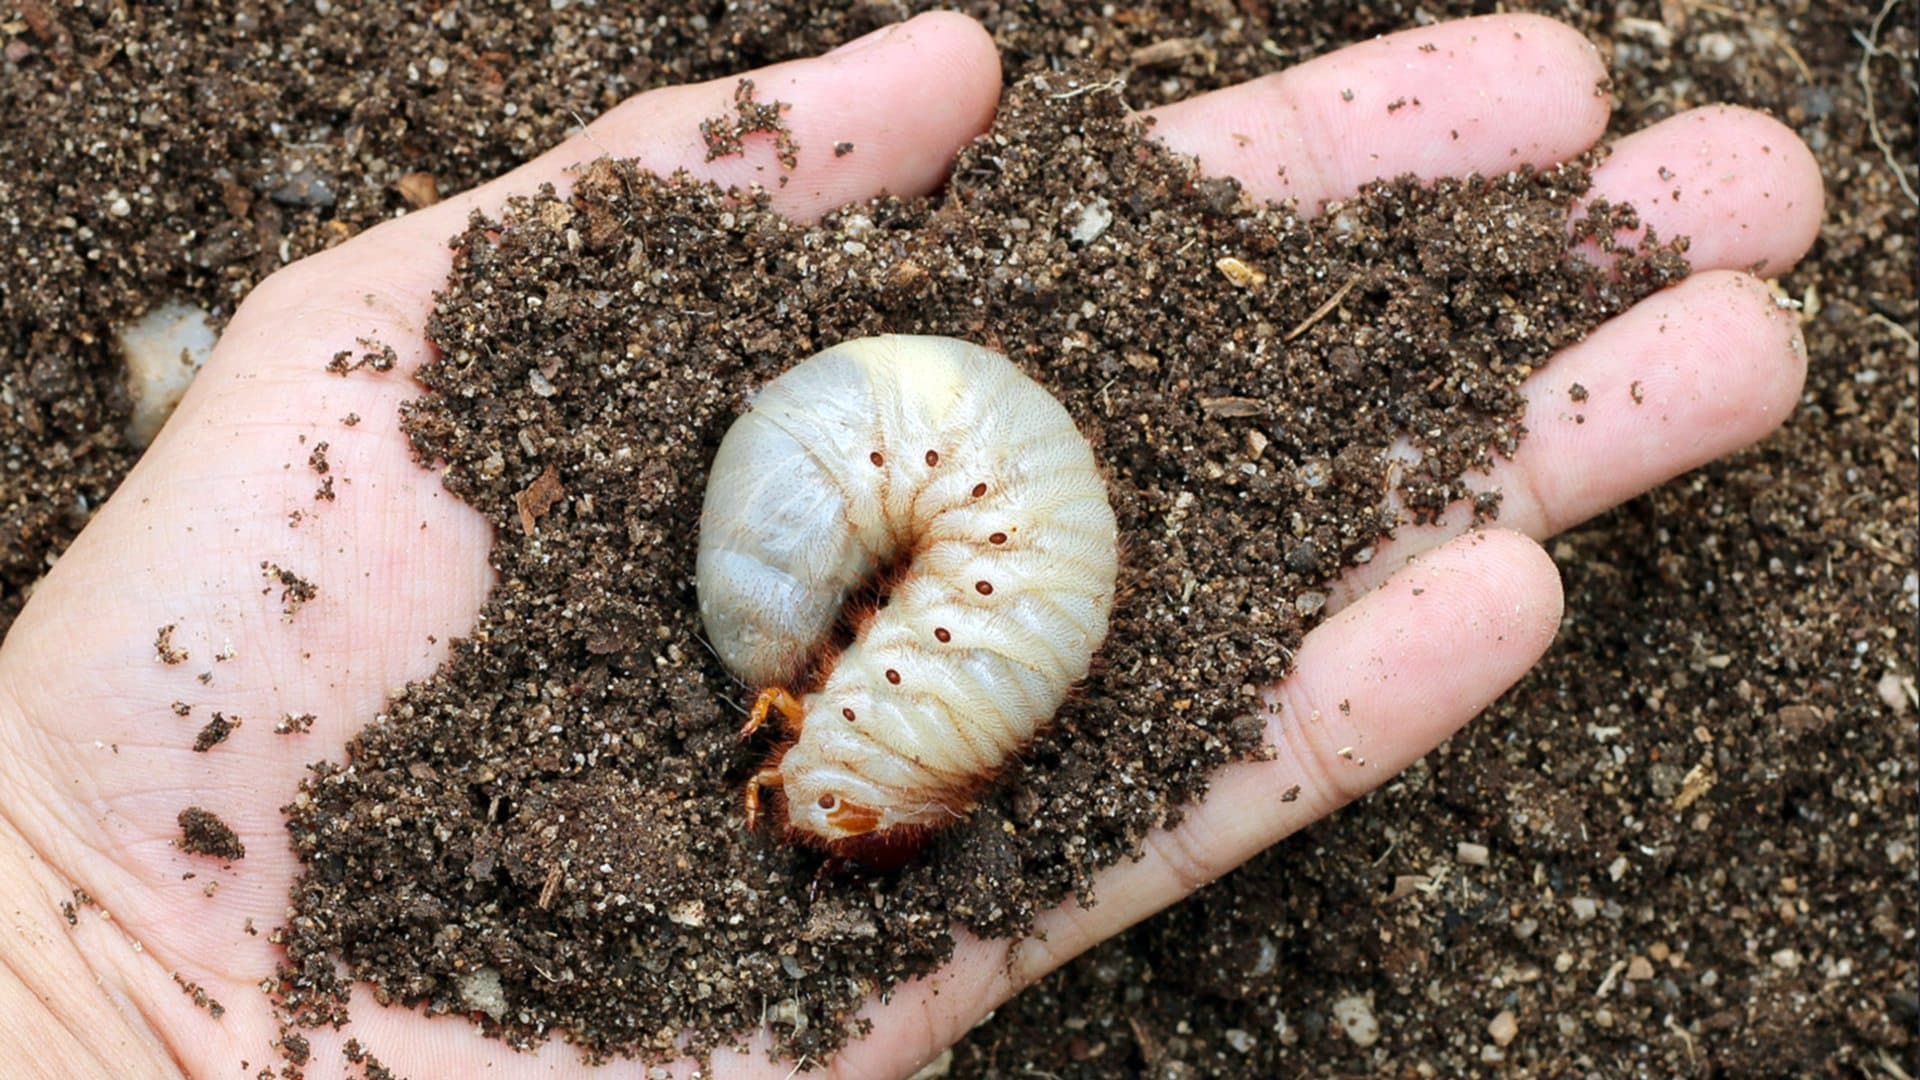 The Easy Way to Get Rid of Lawn Grubs